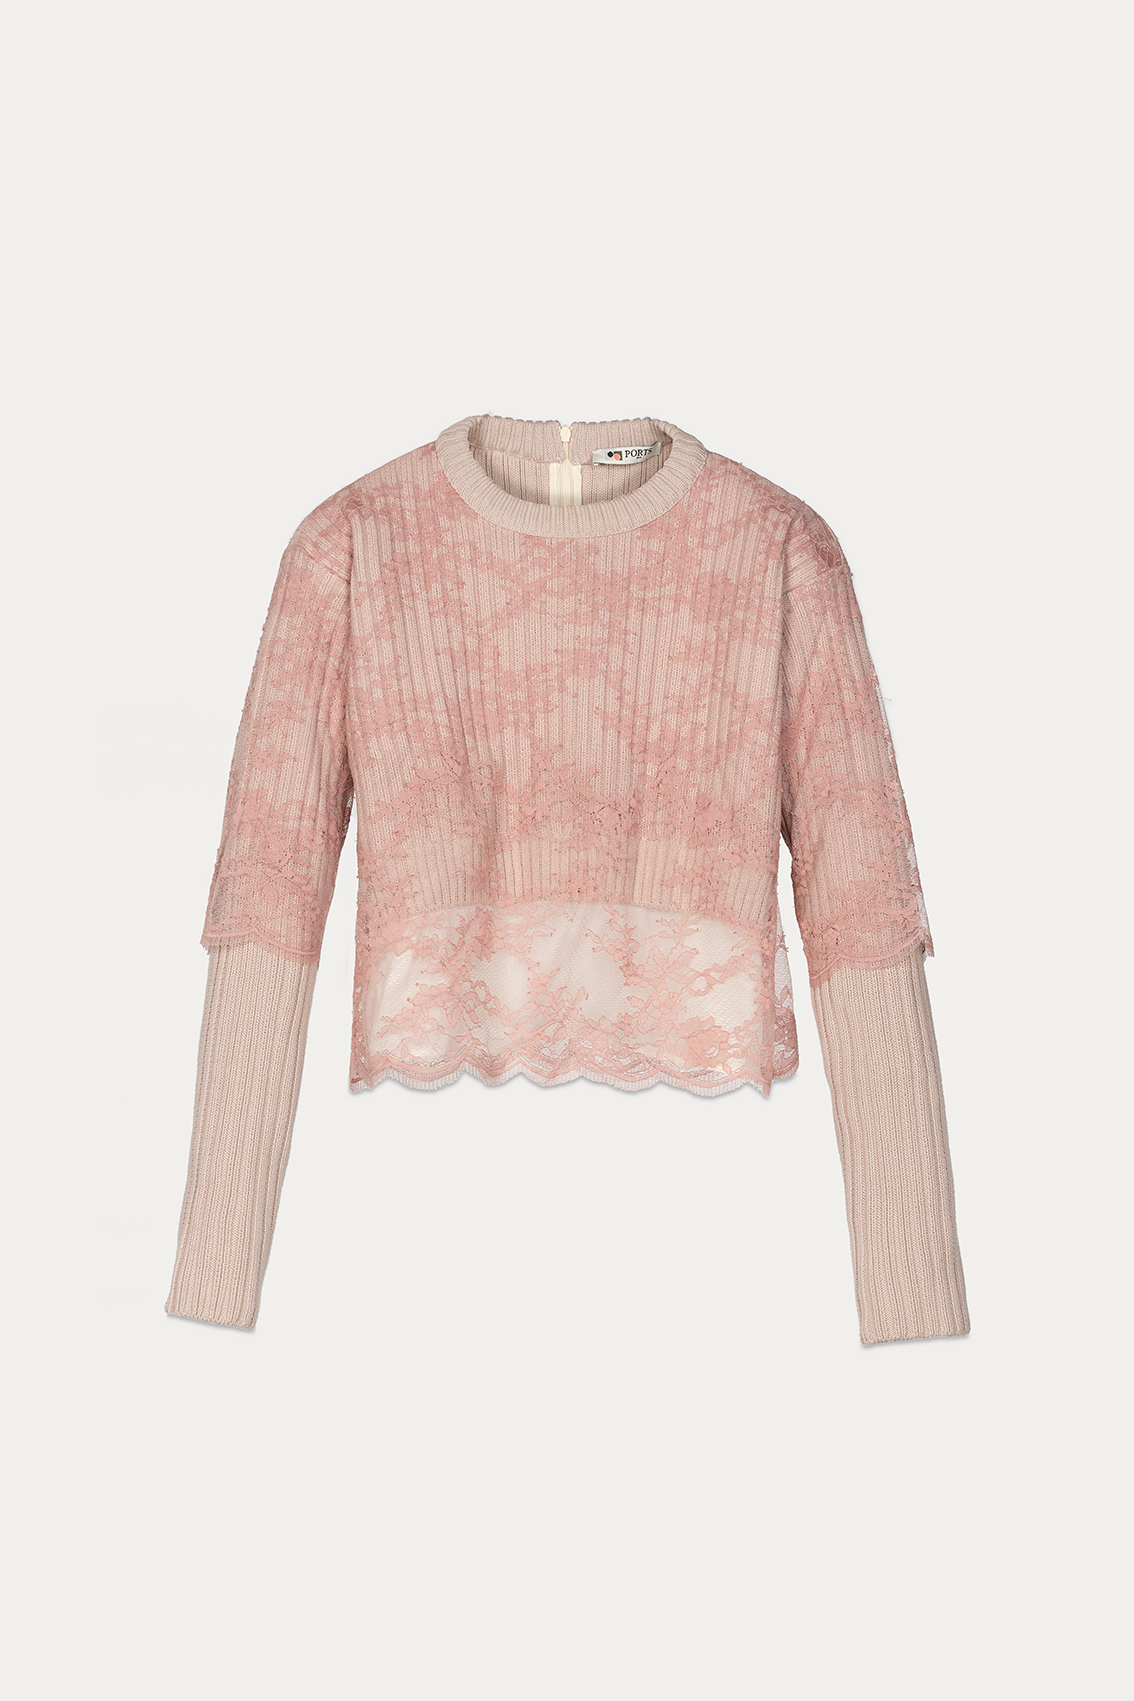 Blush'd Crop Knit with Lace Overlay